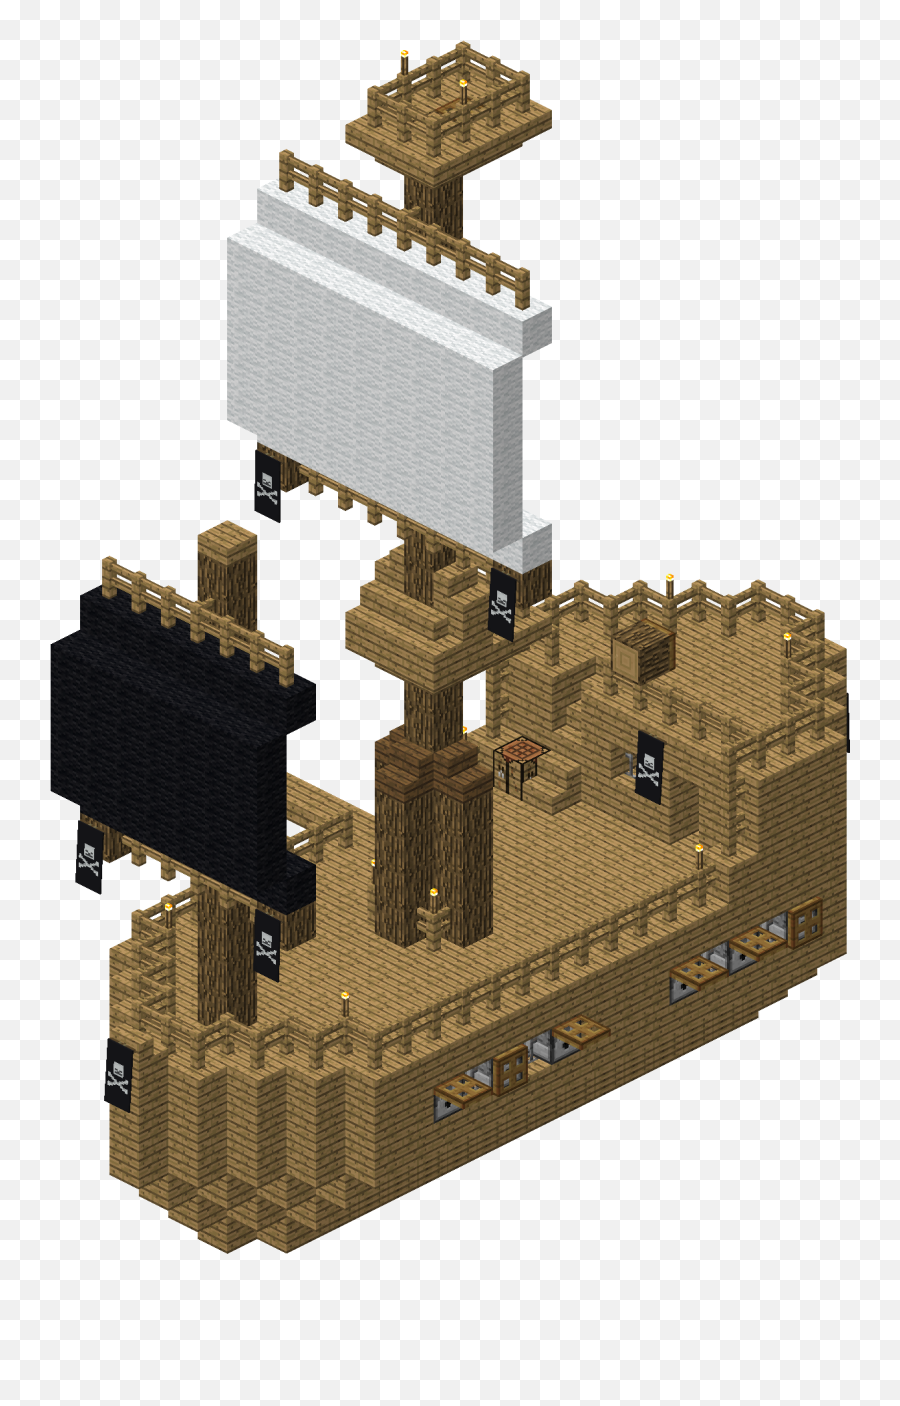 Pirate Ship - Pirate Ship In Minecraft Png,Pirate Ship Png